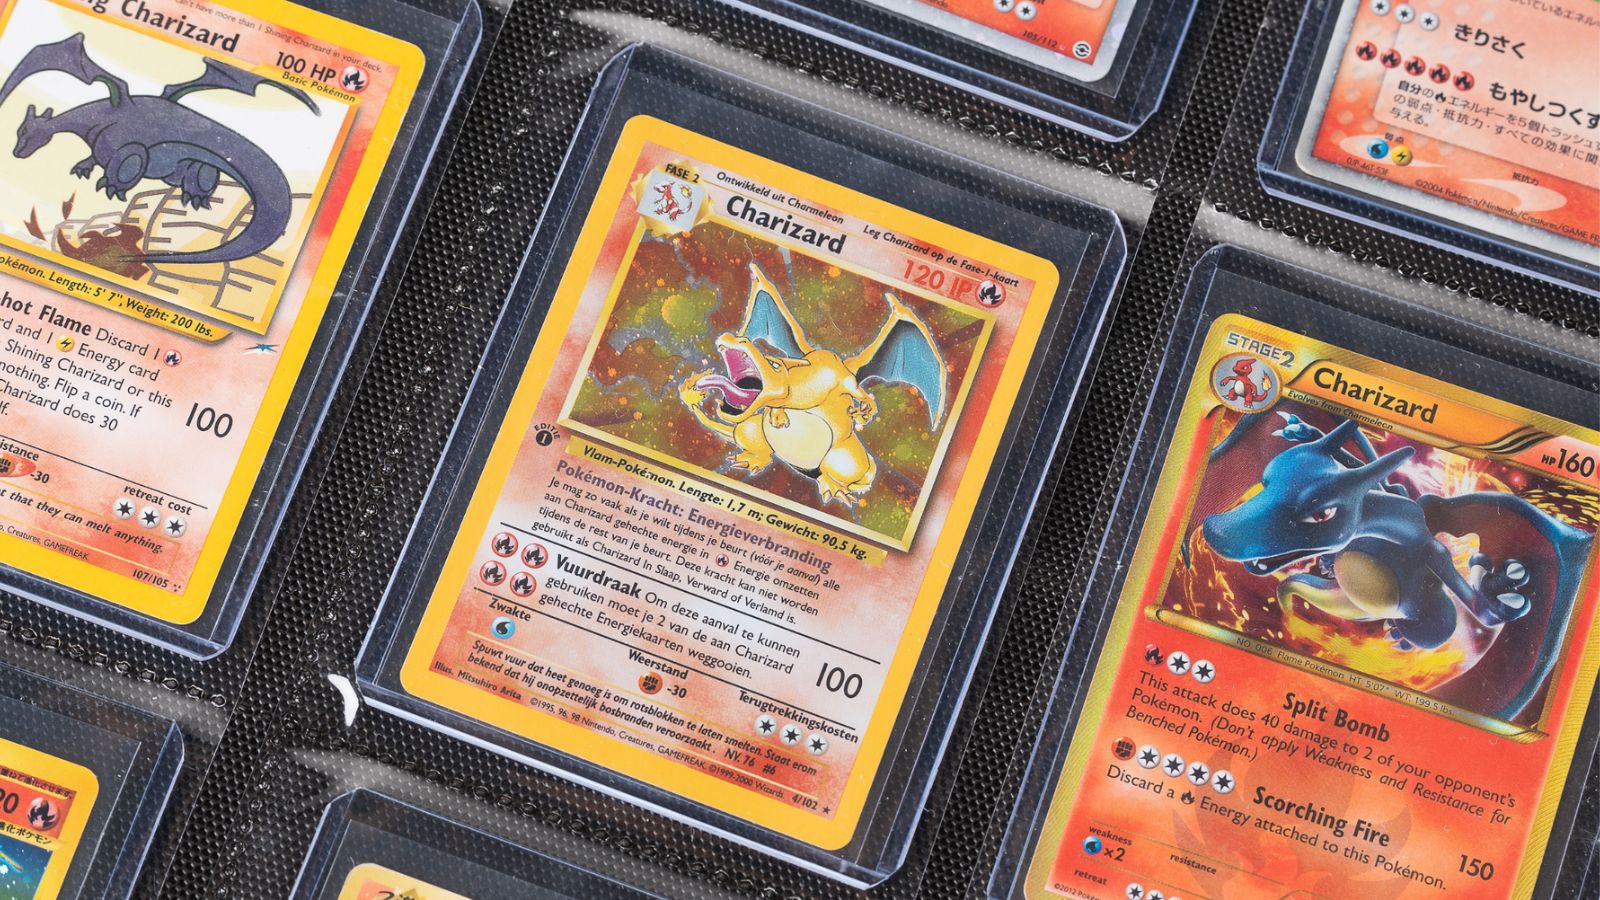 Pokemon TCG fans praise “amazing luck” of first pull in 20+ years